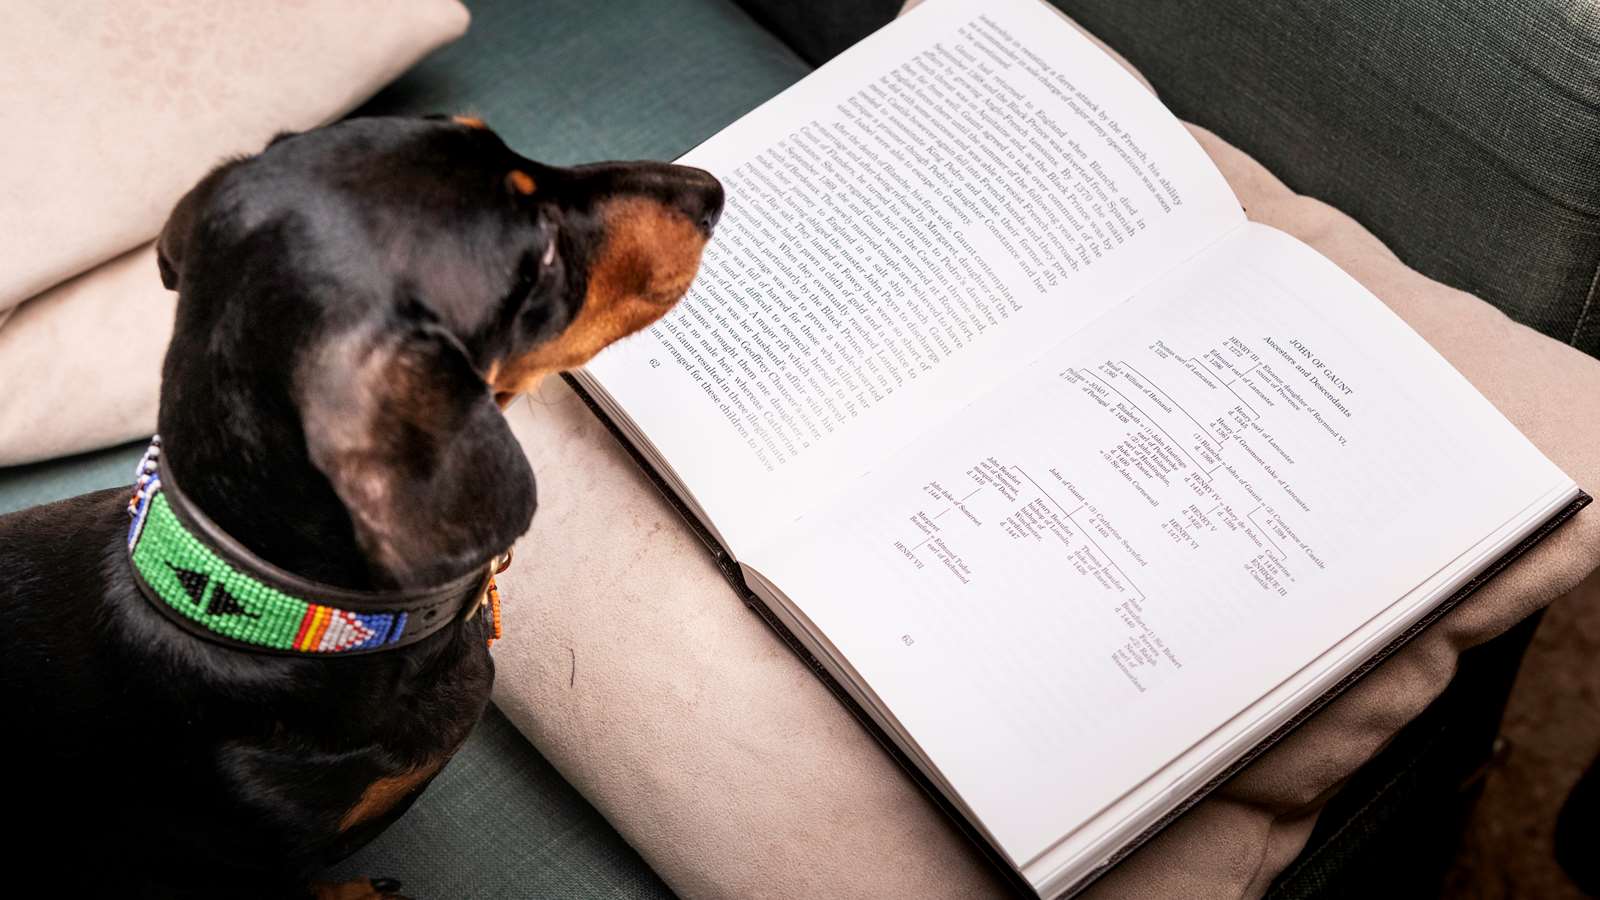 Sausage dog reading at The Kennels, where Goodwoof will be held.